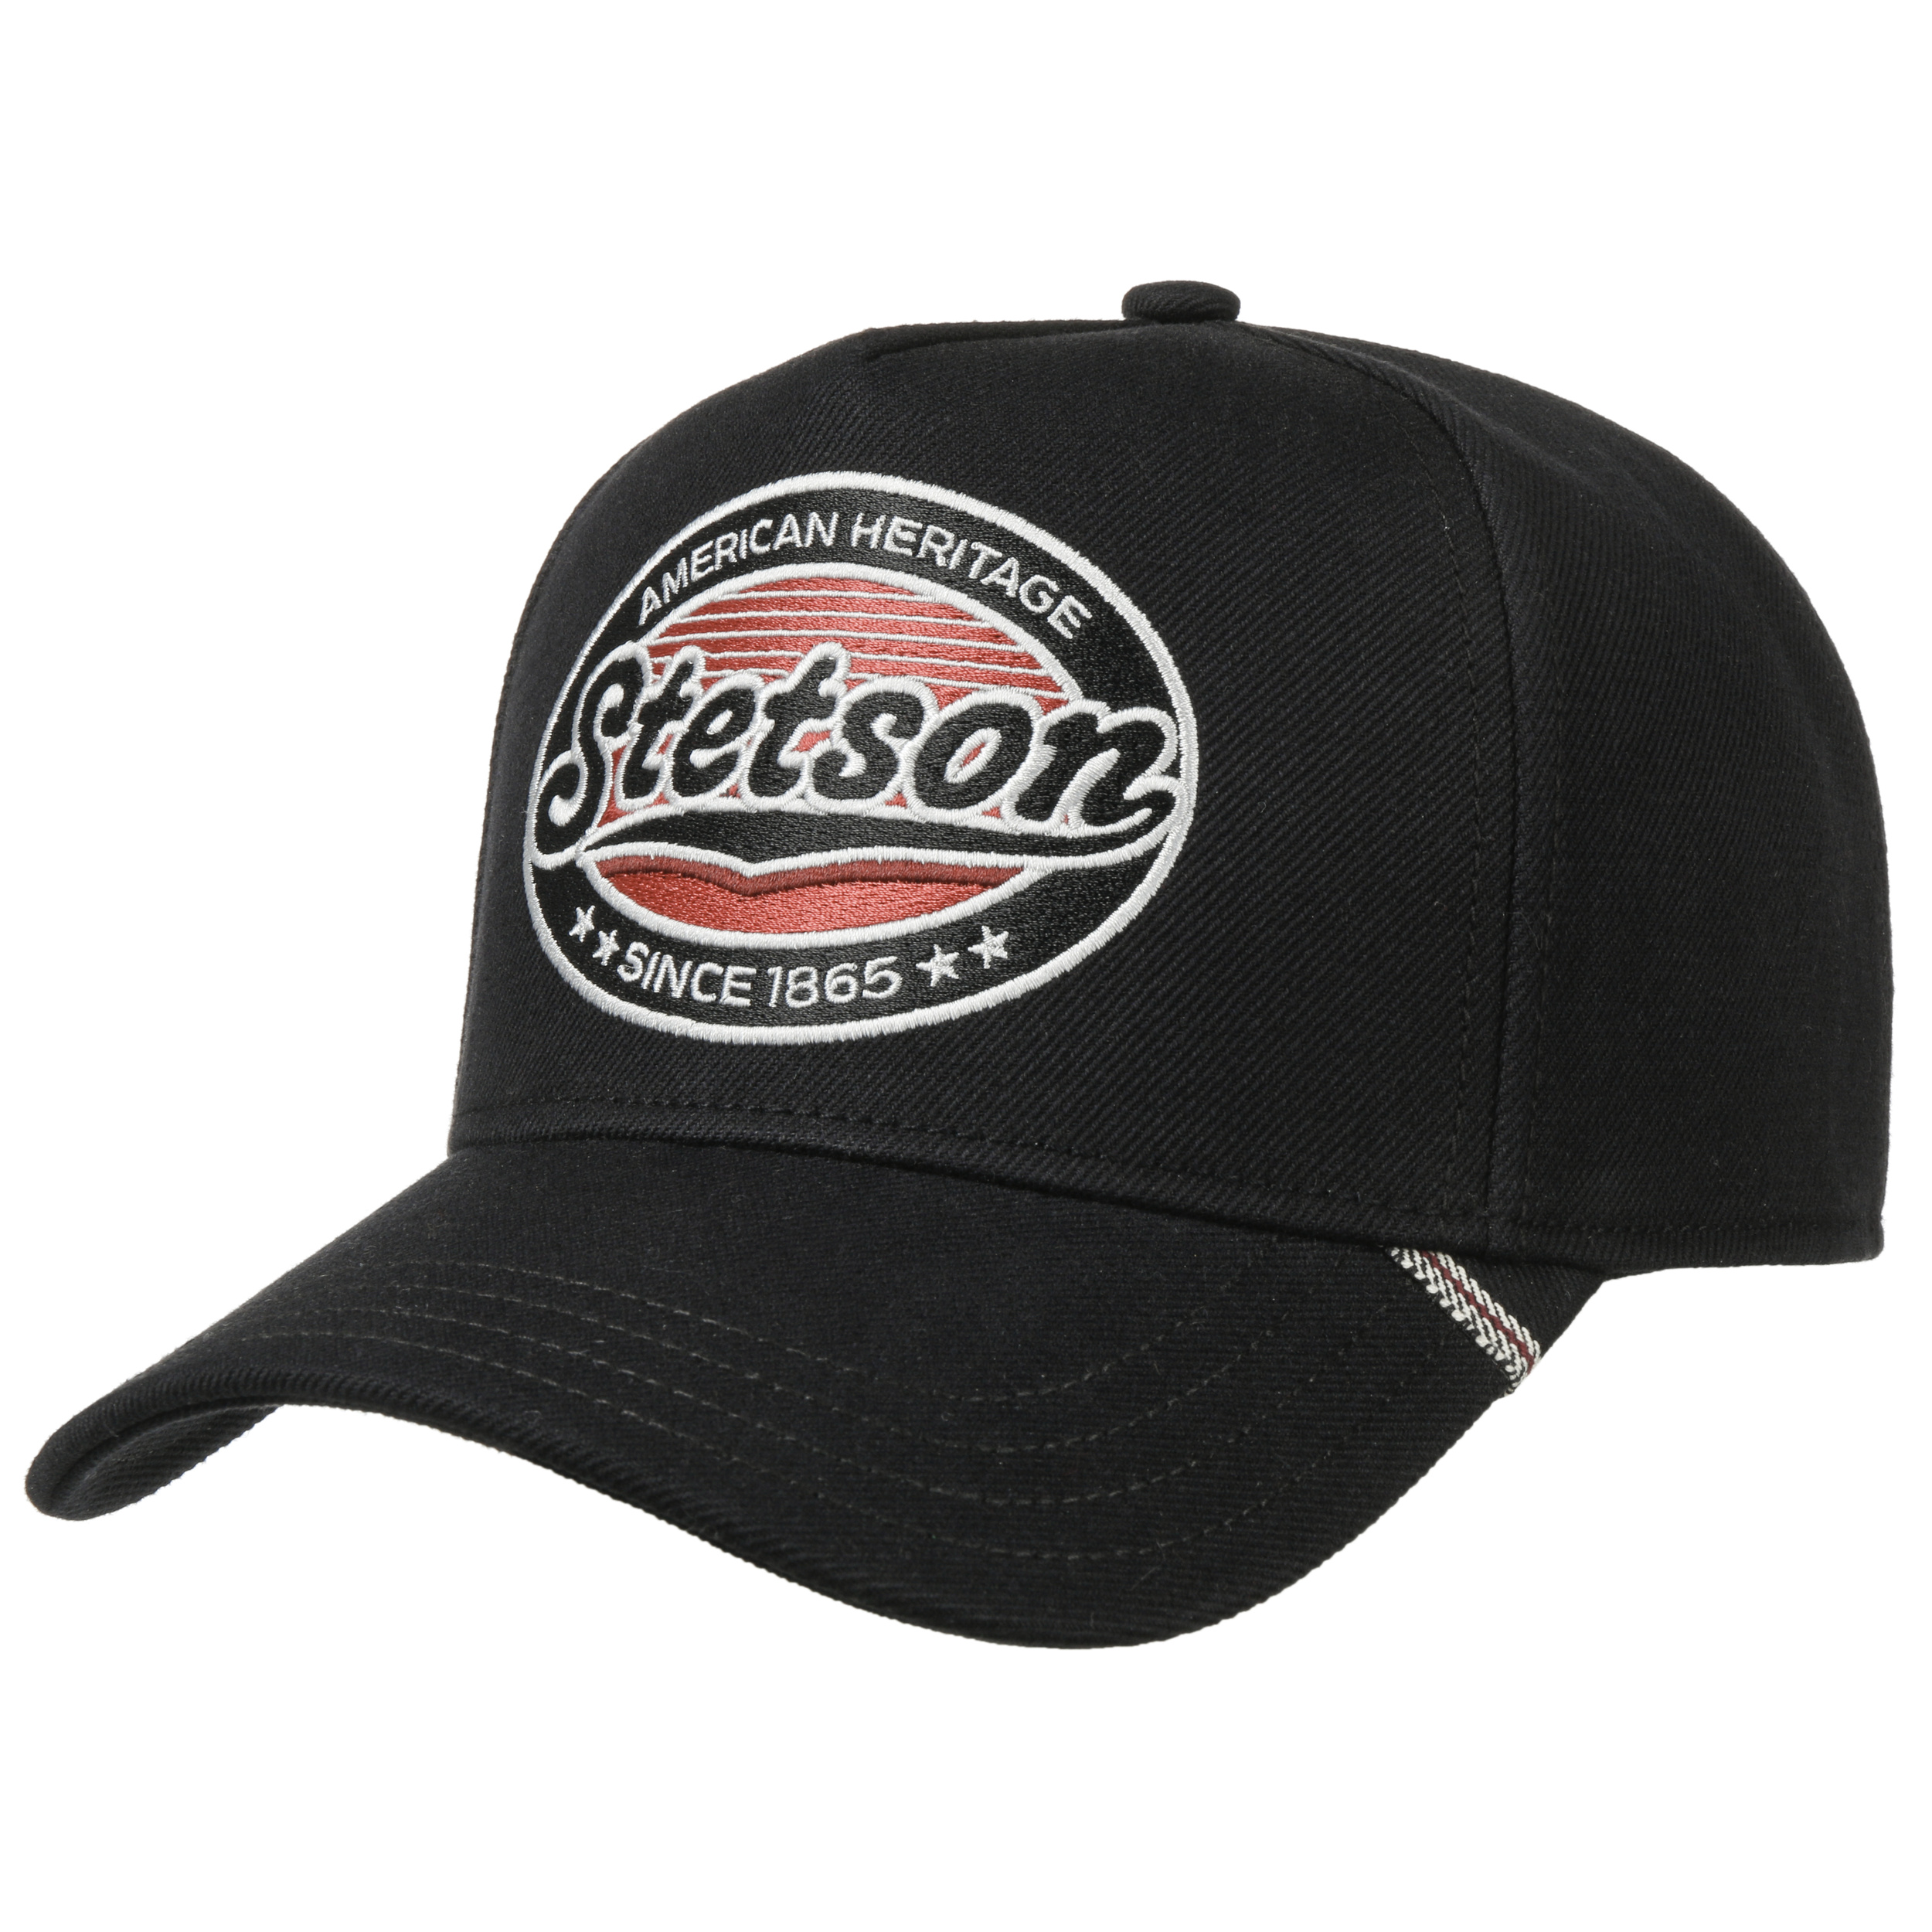 Selvage Denim Cap by Stetson - 99,00